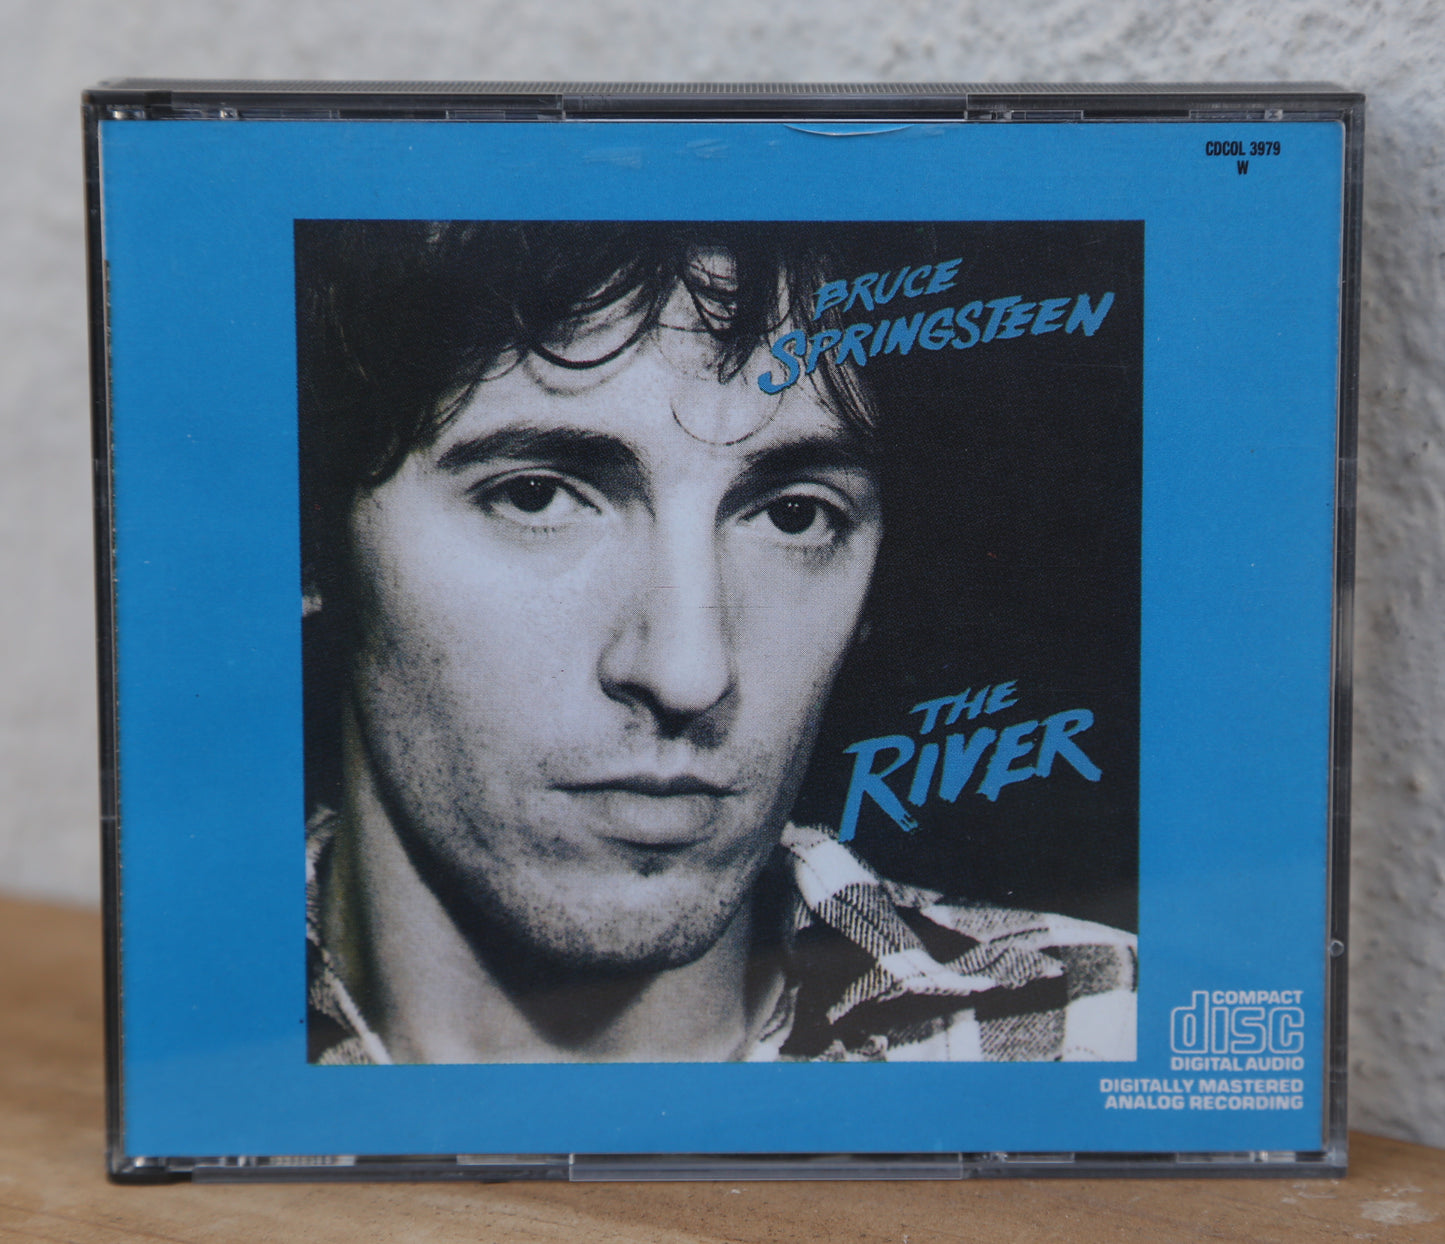 Bruce Springsteen - The River (double disc)